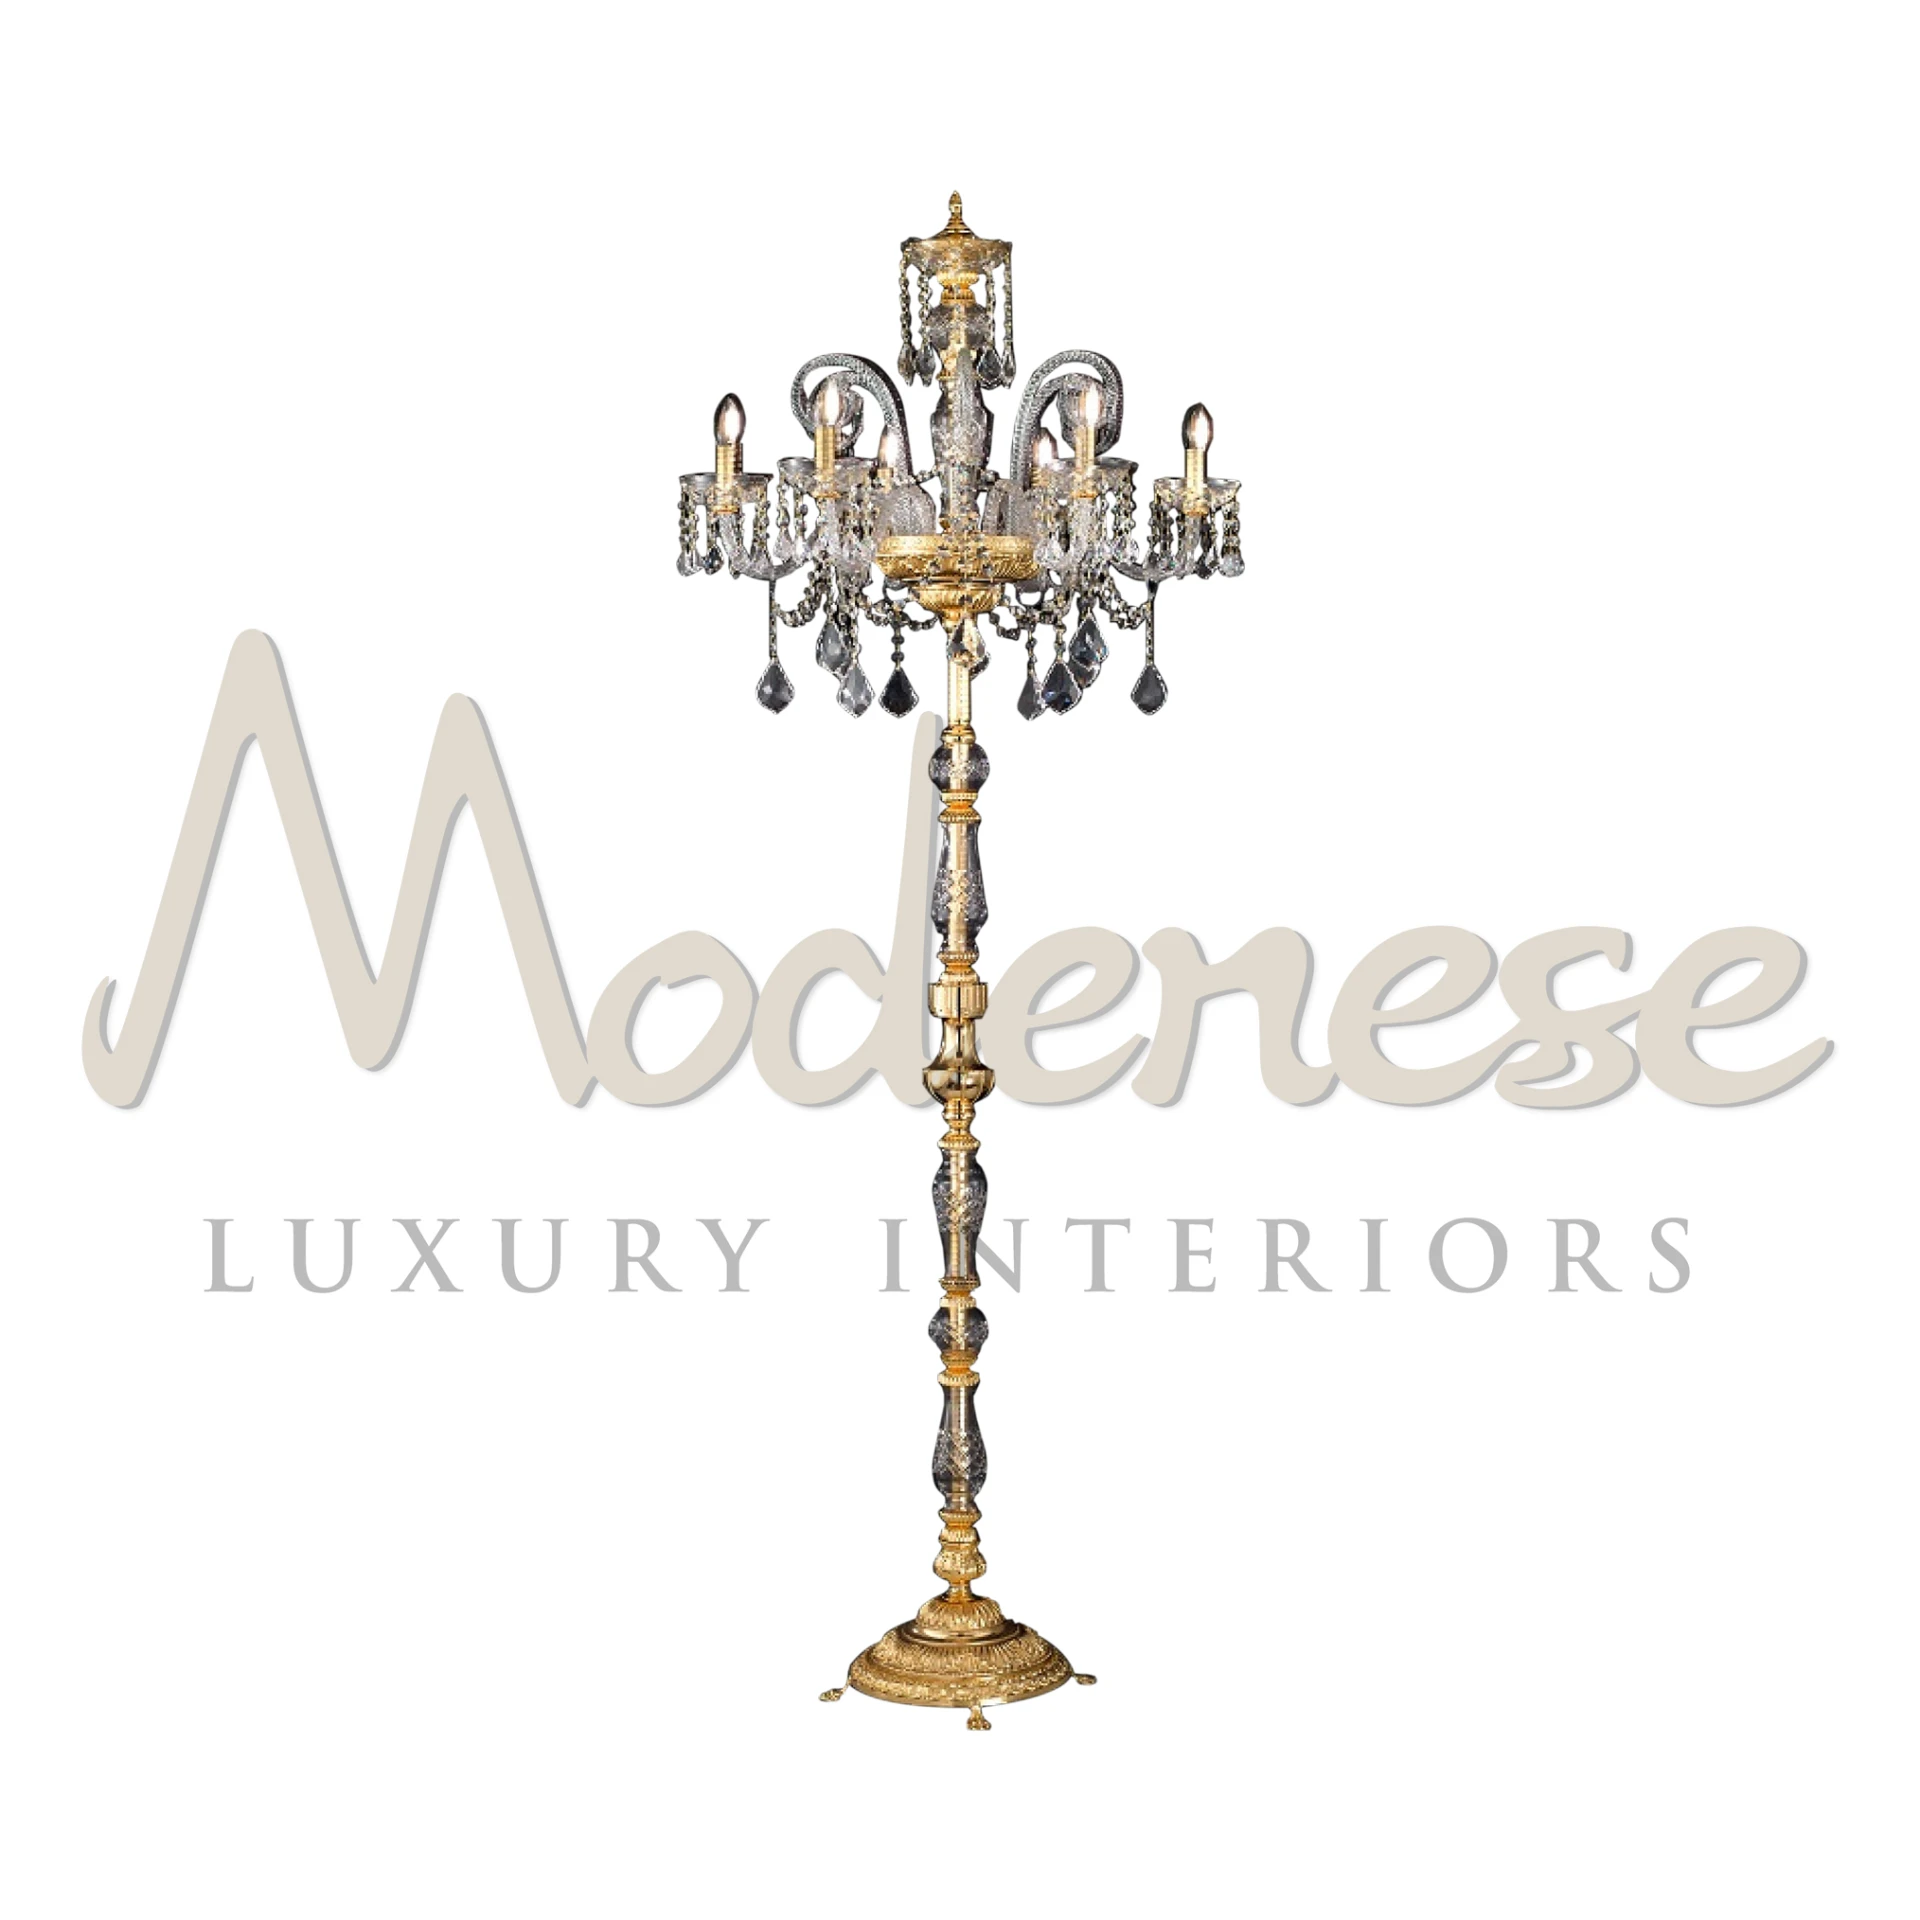 Golden and crystal Luxe Floor Lamp with multiple arms and decorative details